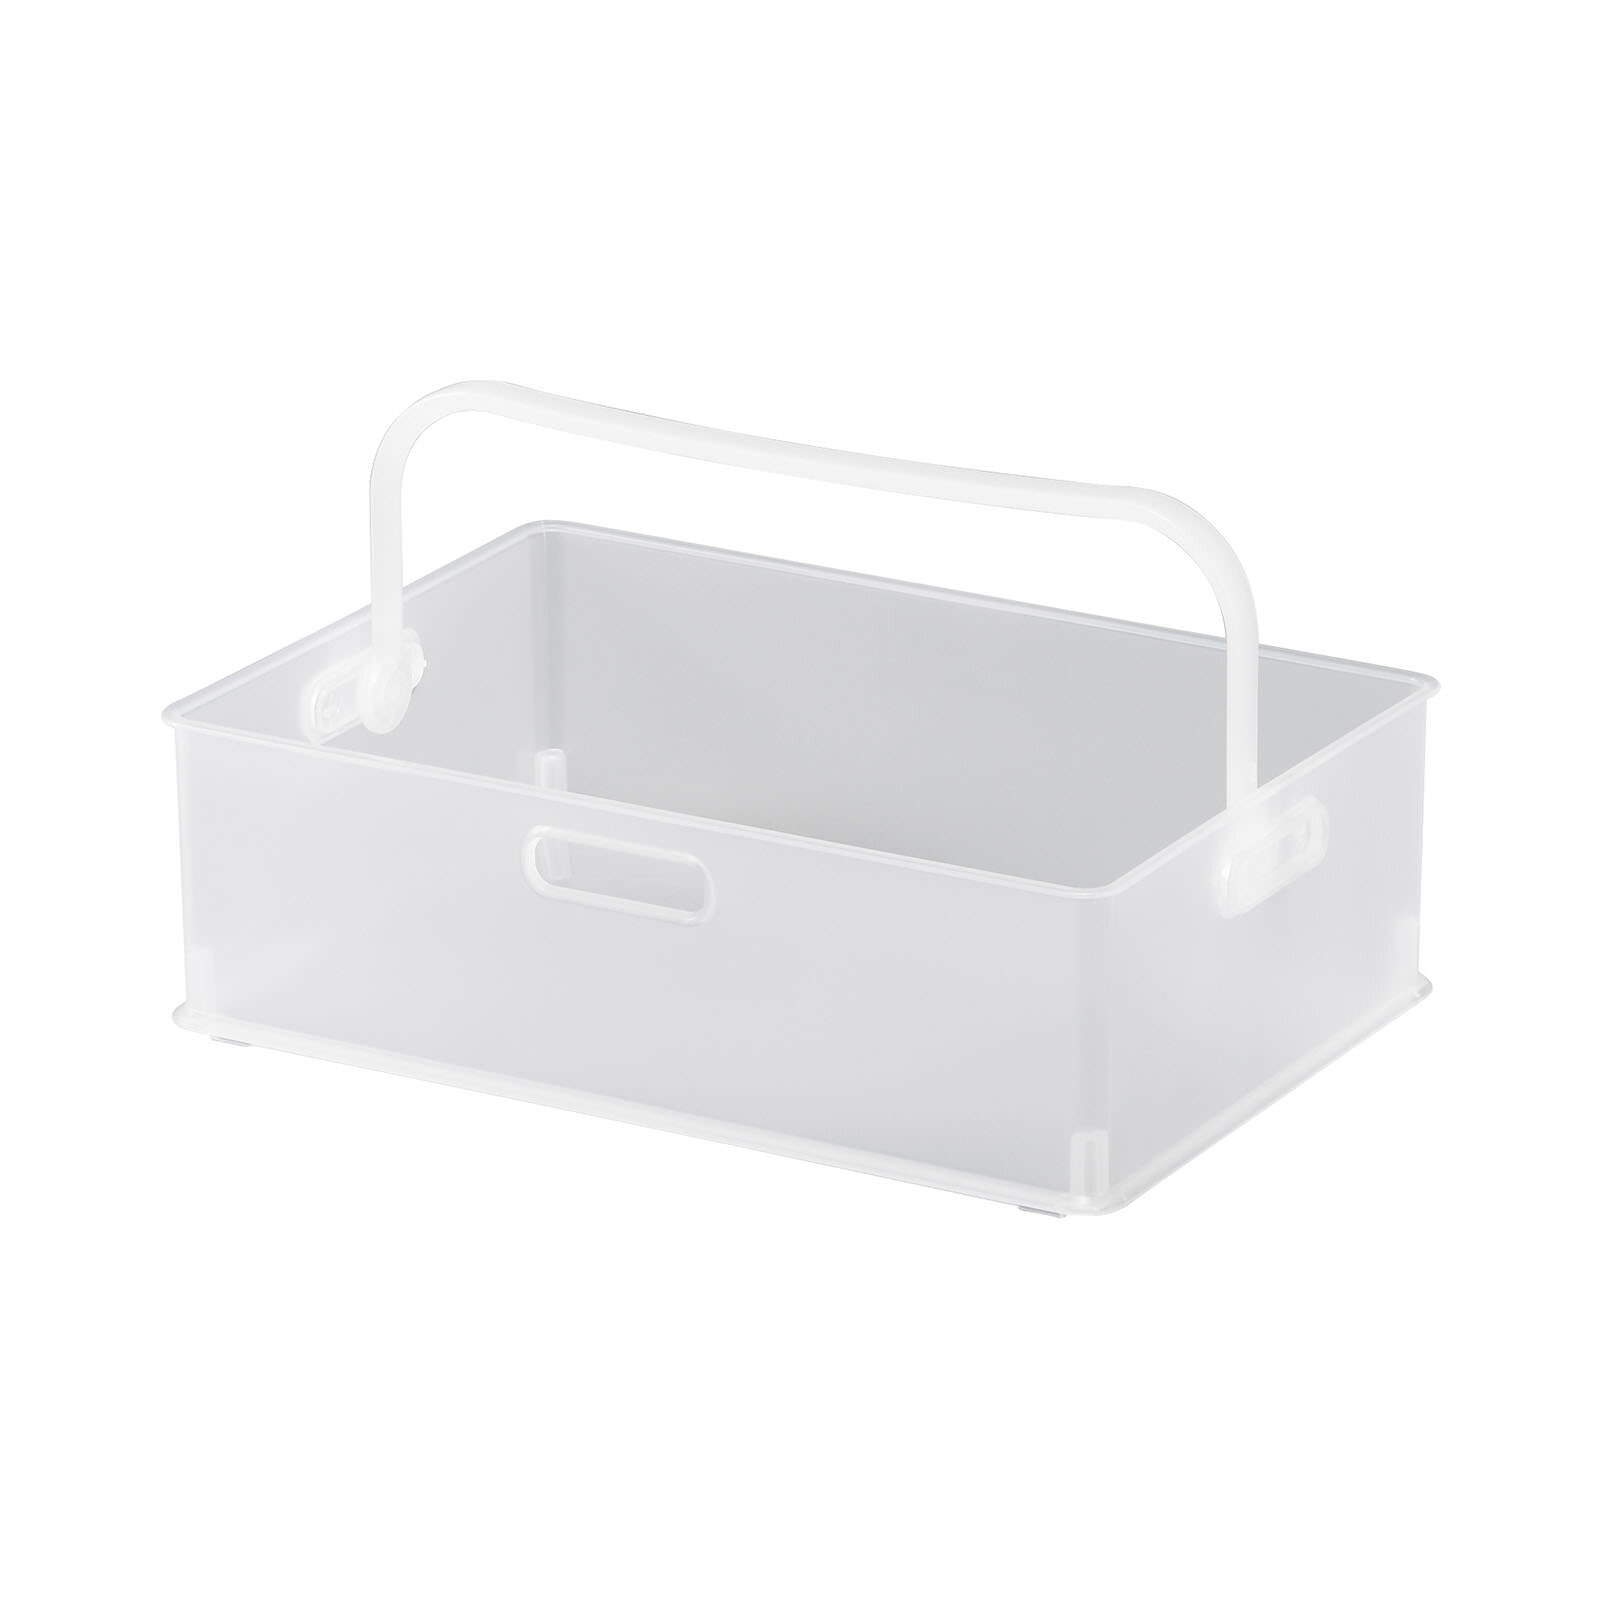 Pebbly PKV-007 Storage Container, Natural, 2, 2 L, 11 x 11 x 30 cm